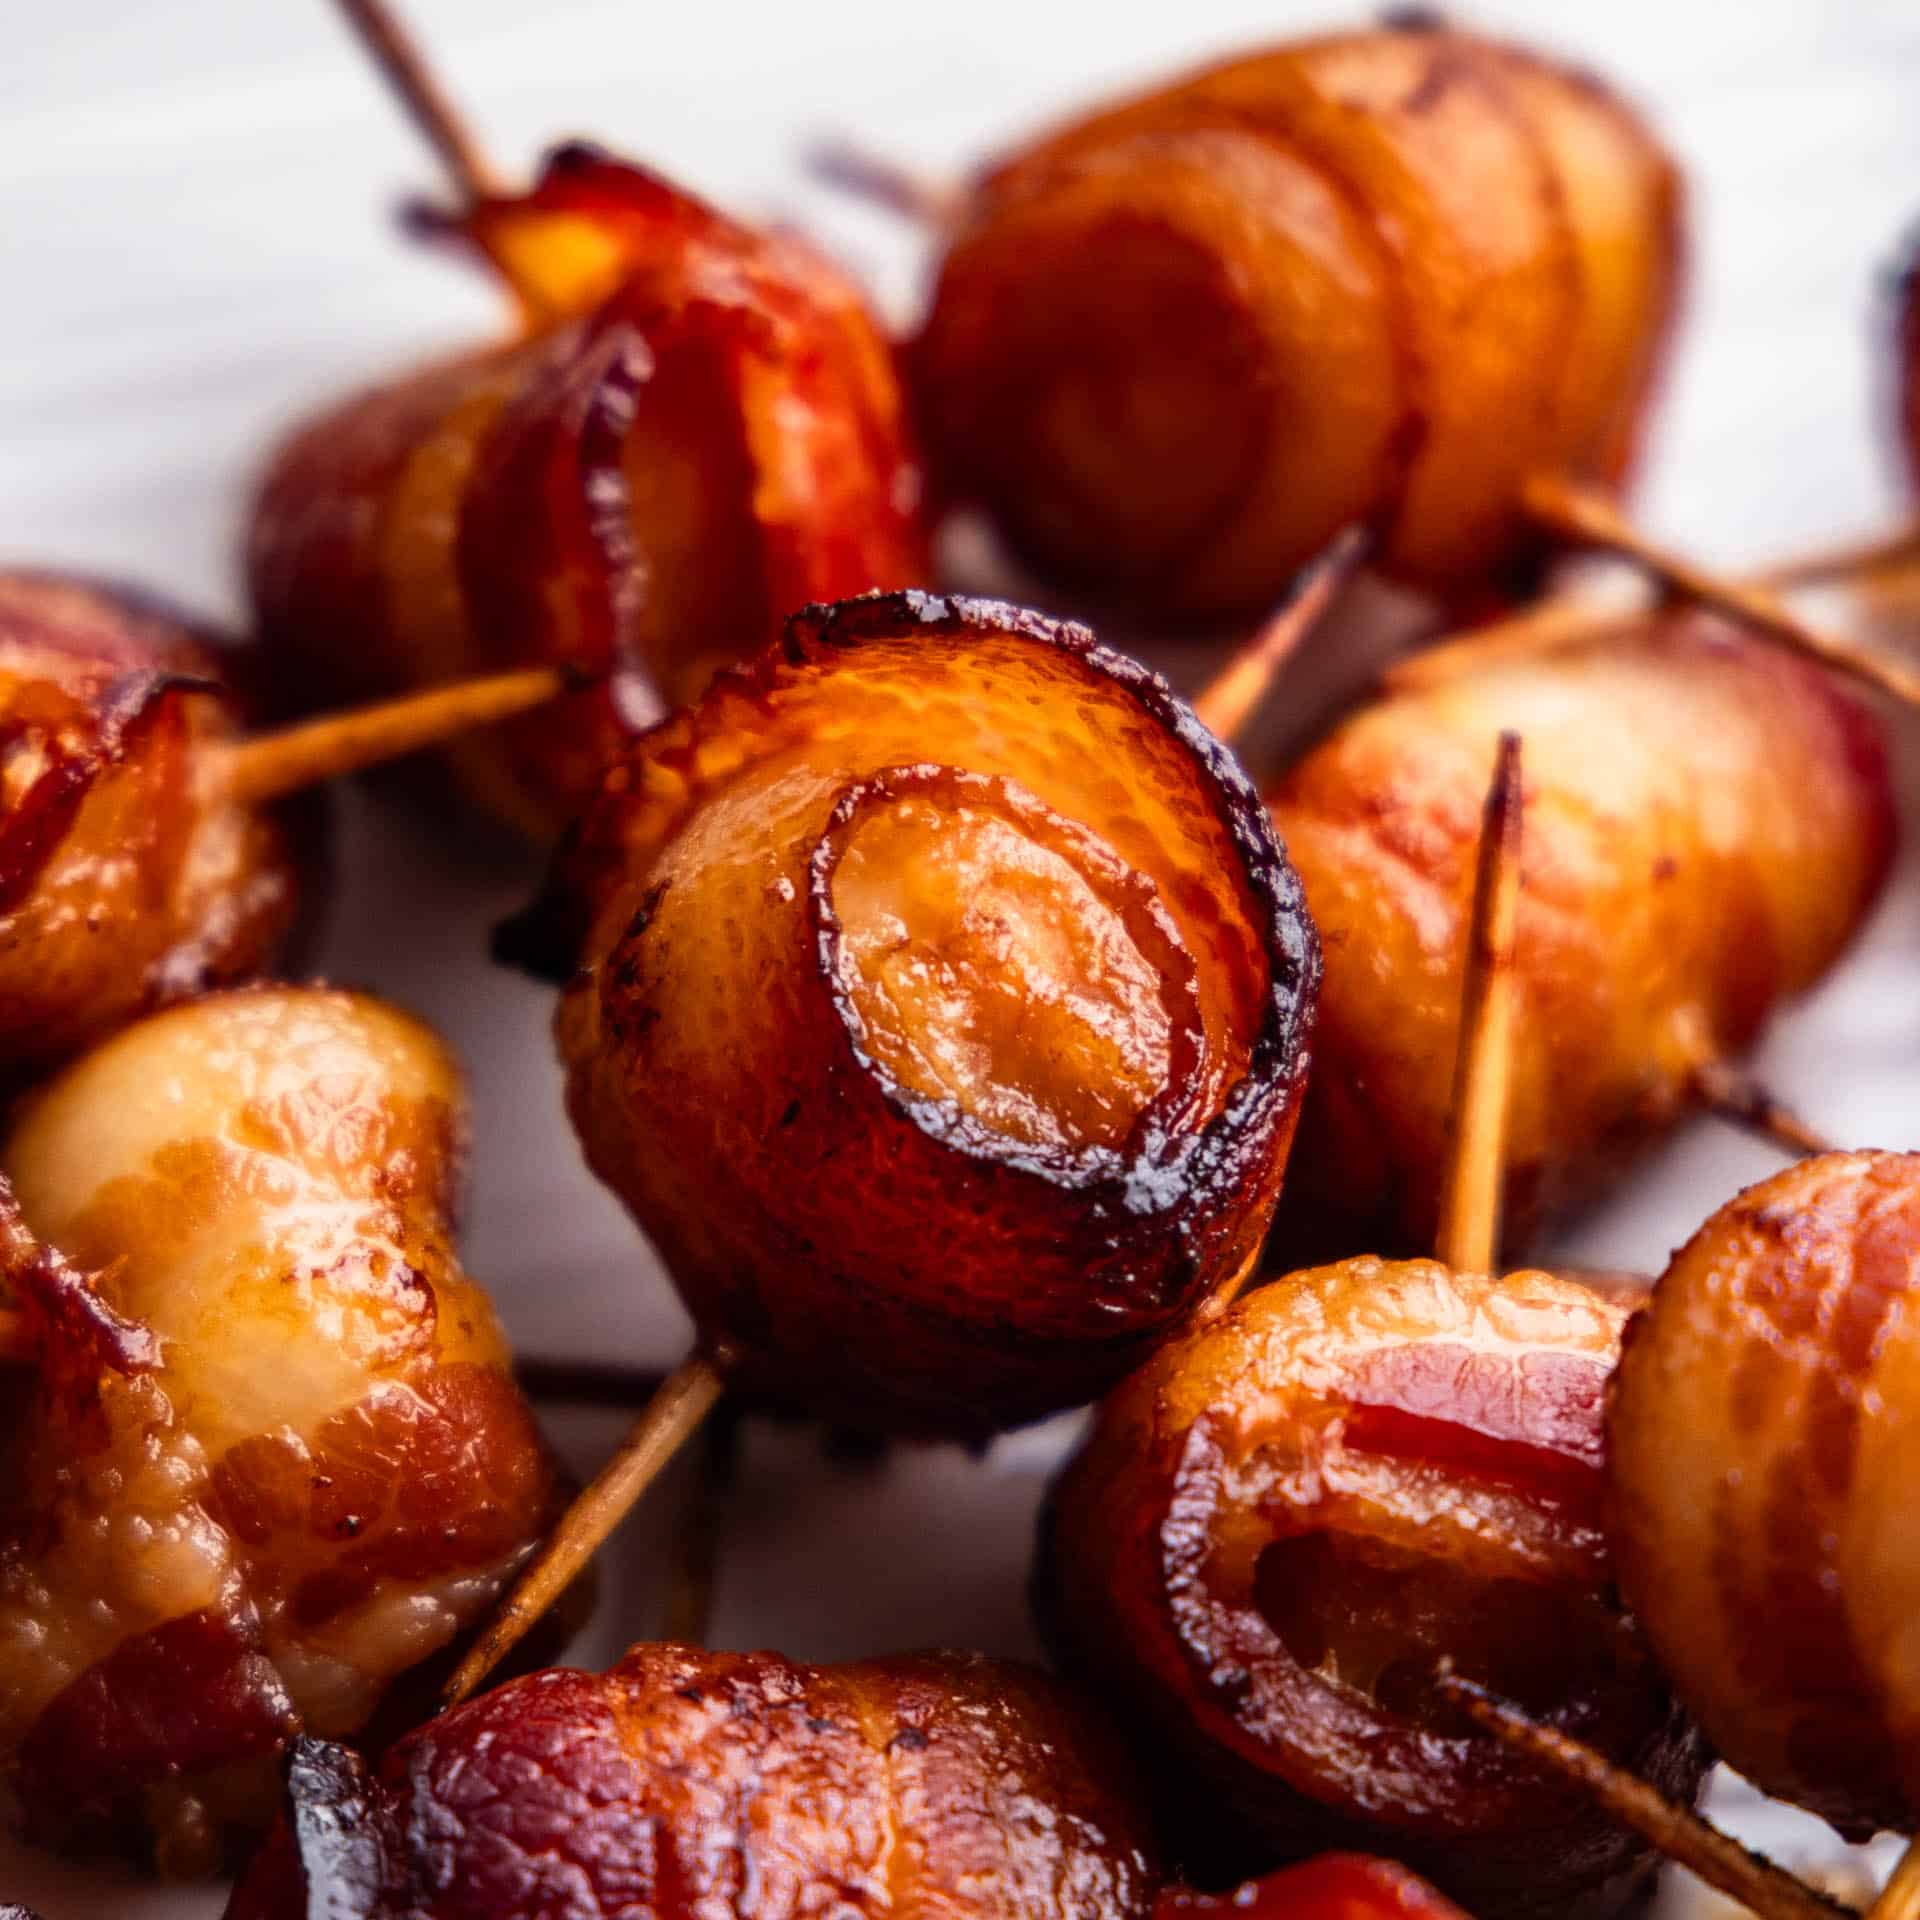 A close up view of a pile of bacon wrapped water chestnuts.